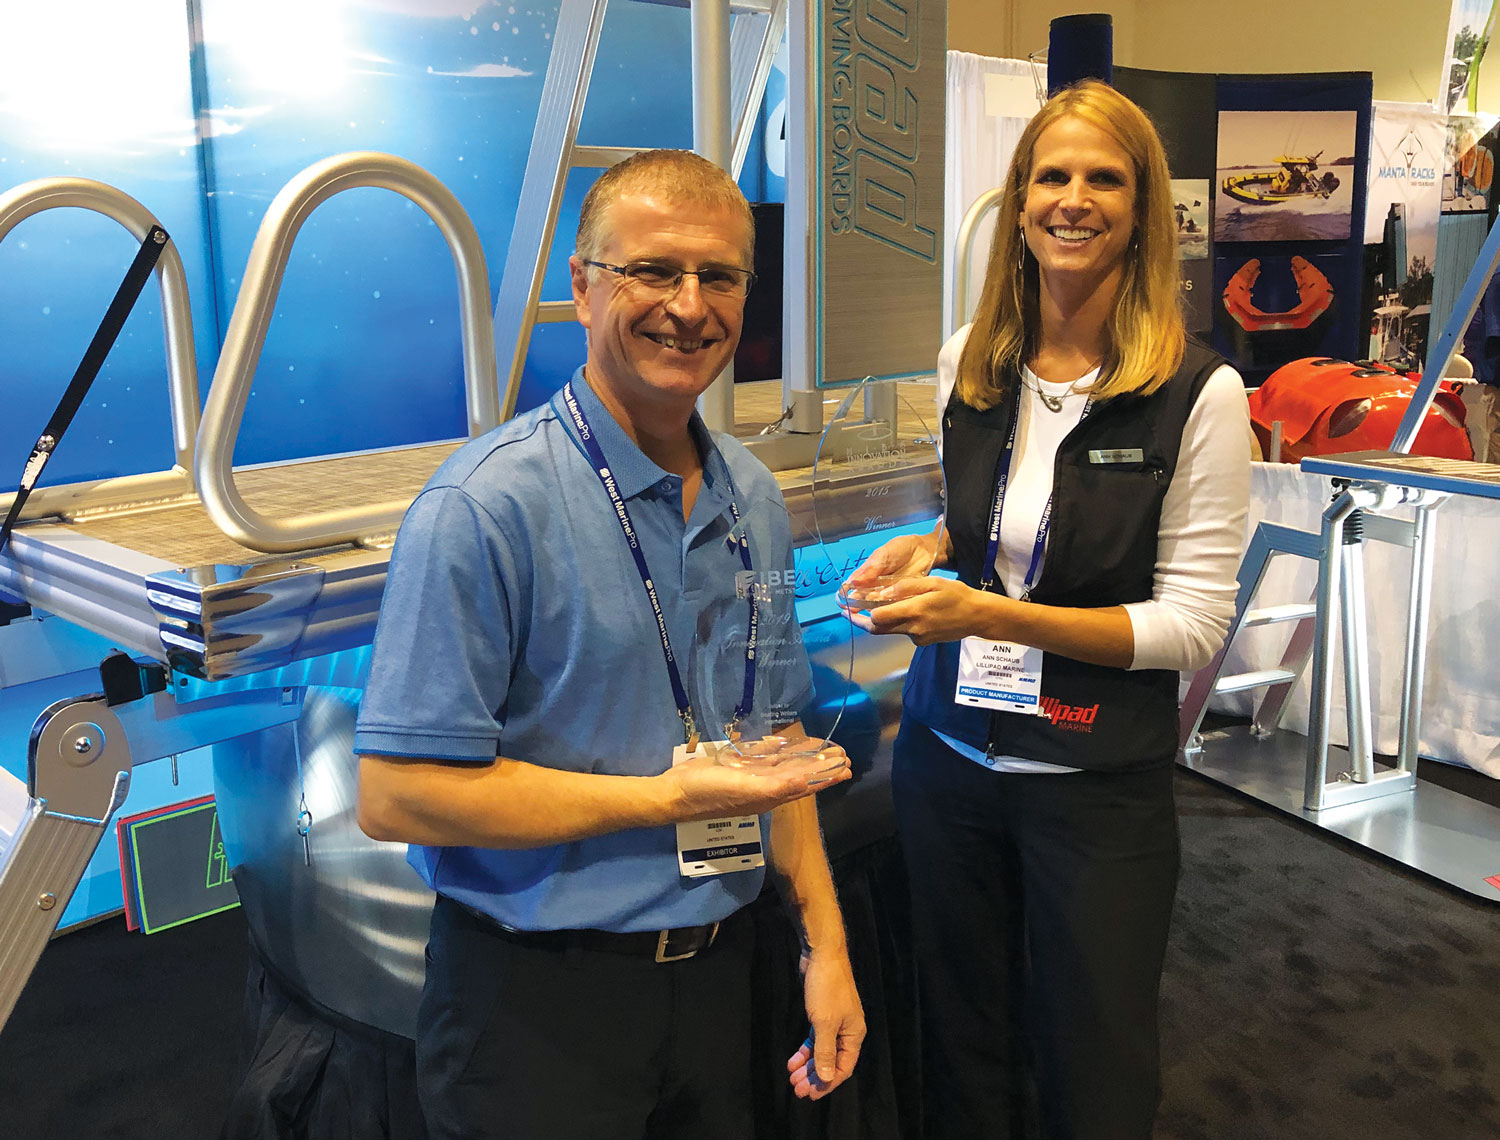 Corey Schaub (L) and his wife Ann proudly hold their NMMA Innovation Awards during the 2019 IBEX show